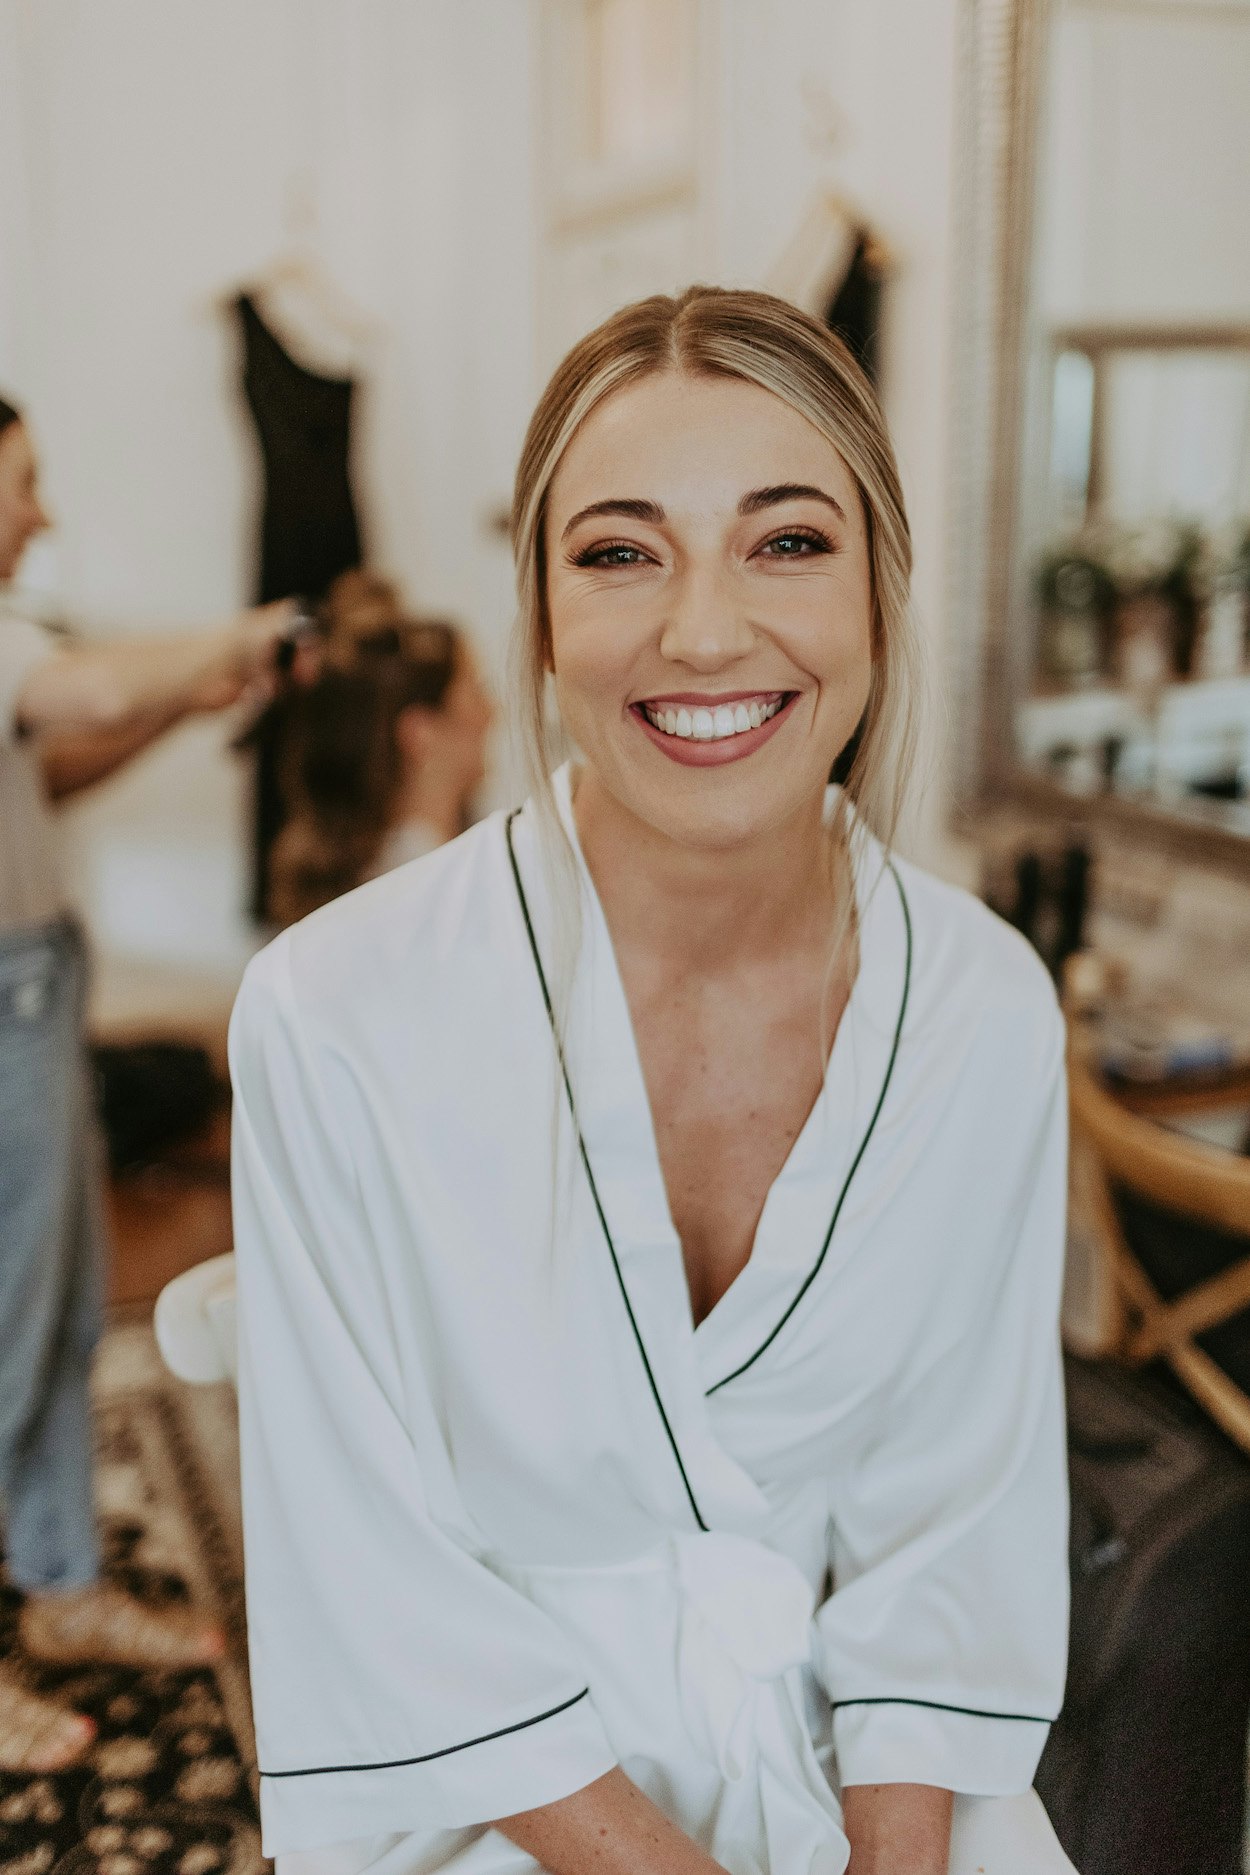 Bride with makeup on smiling 